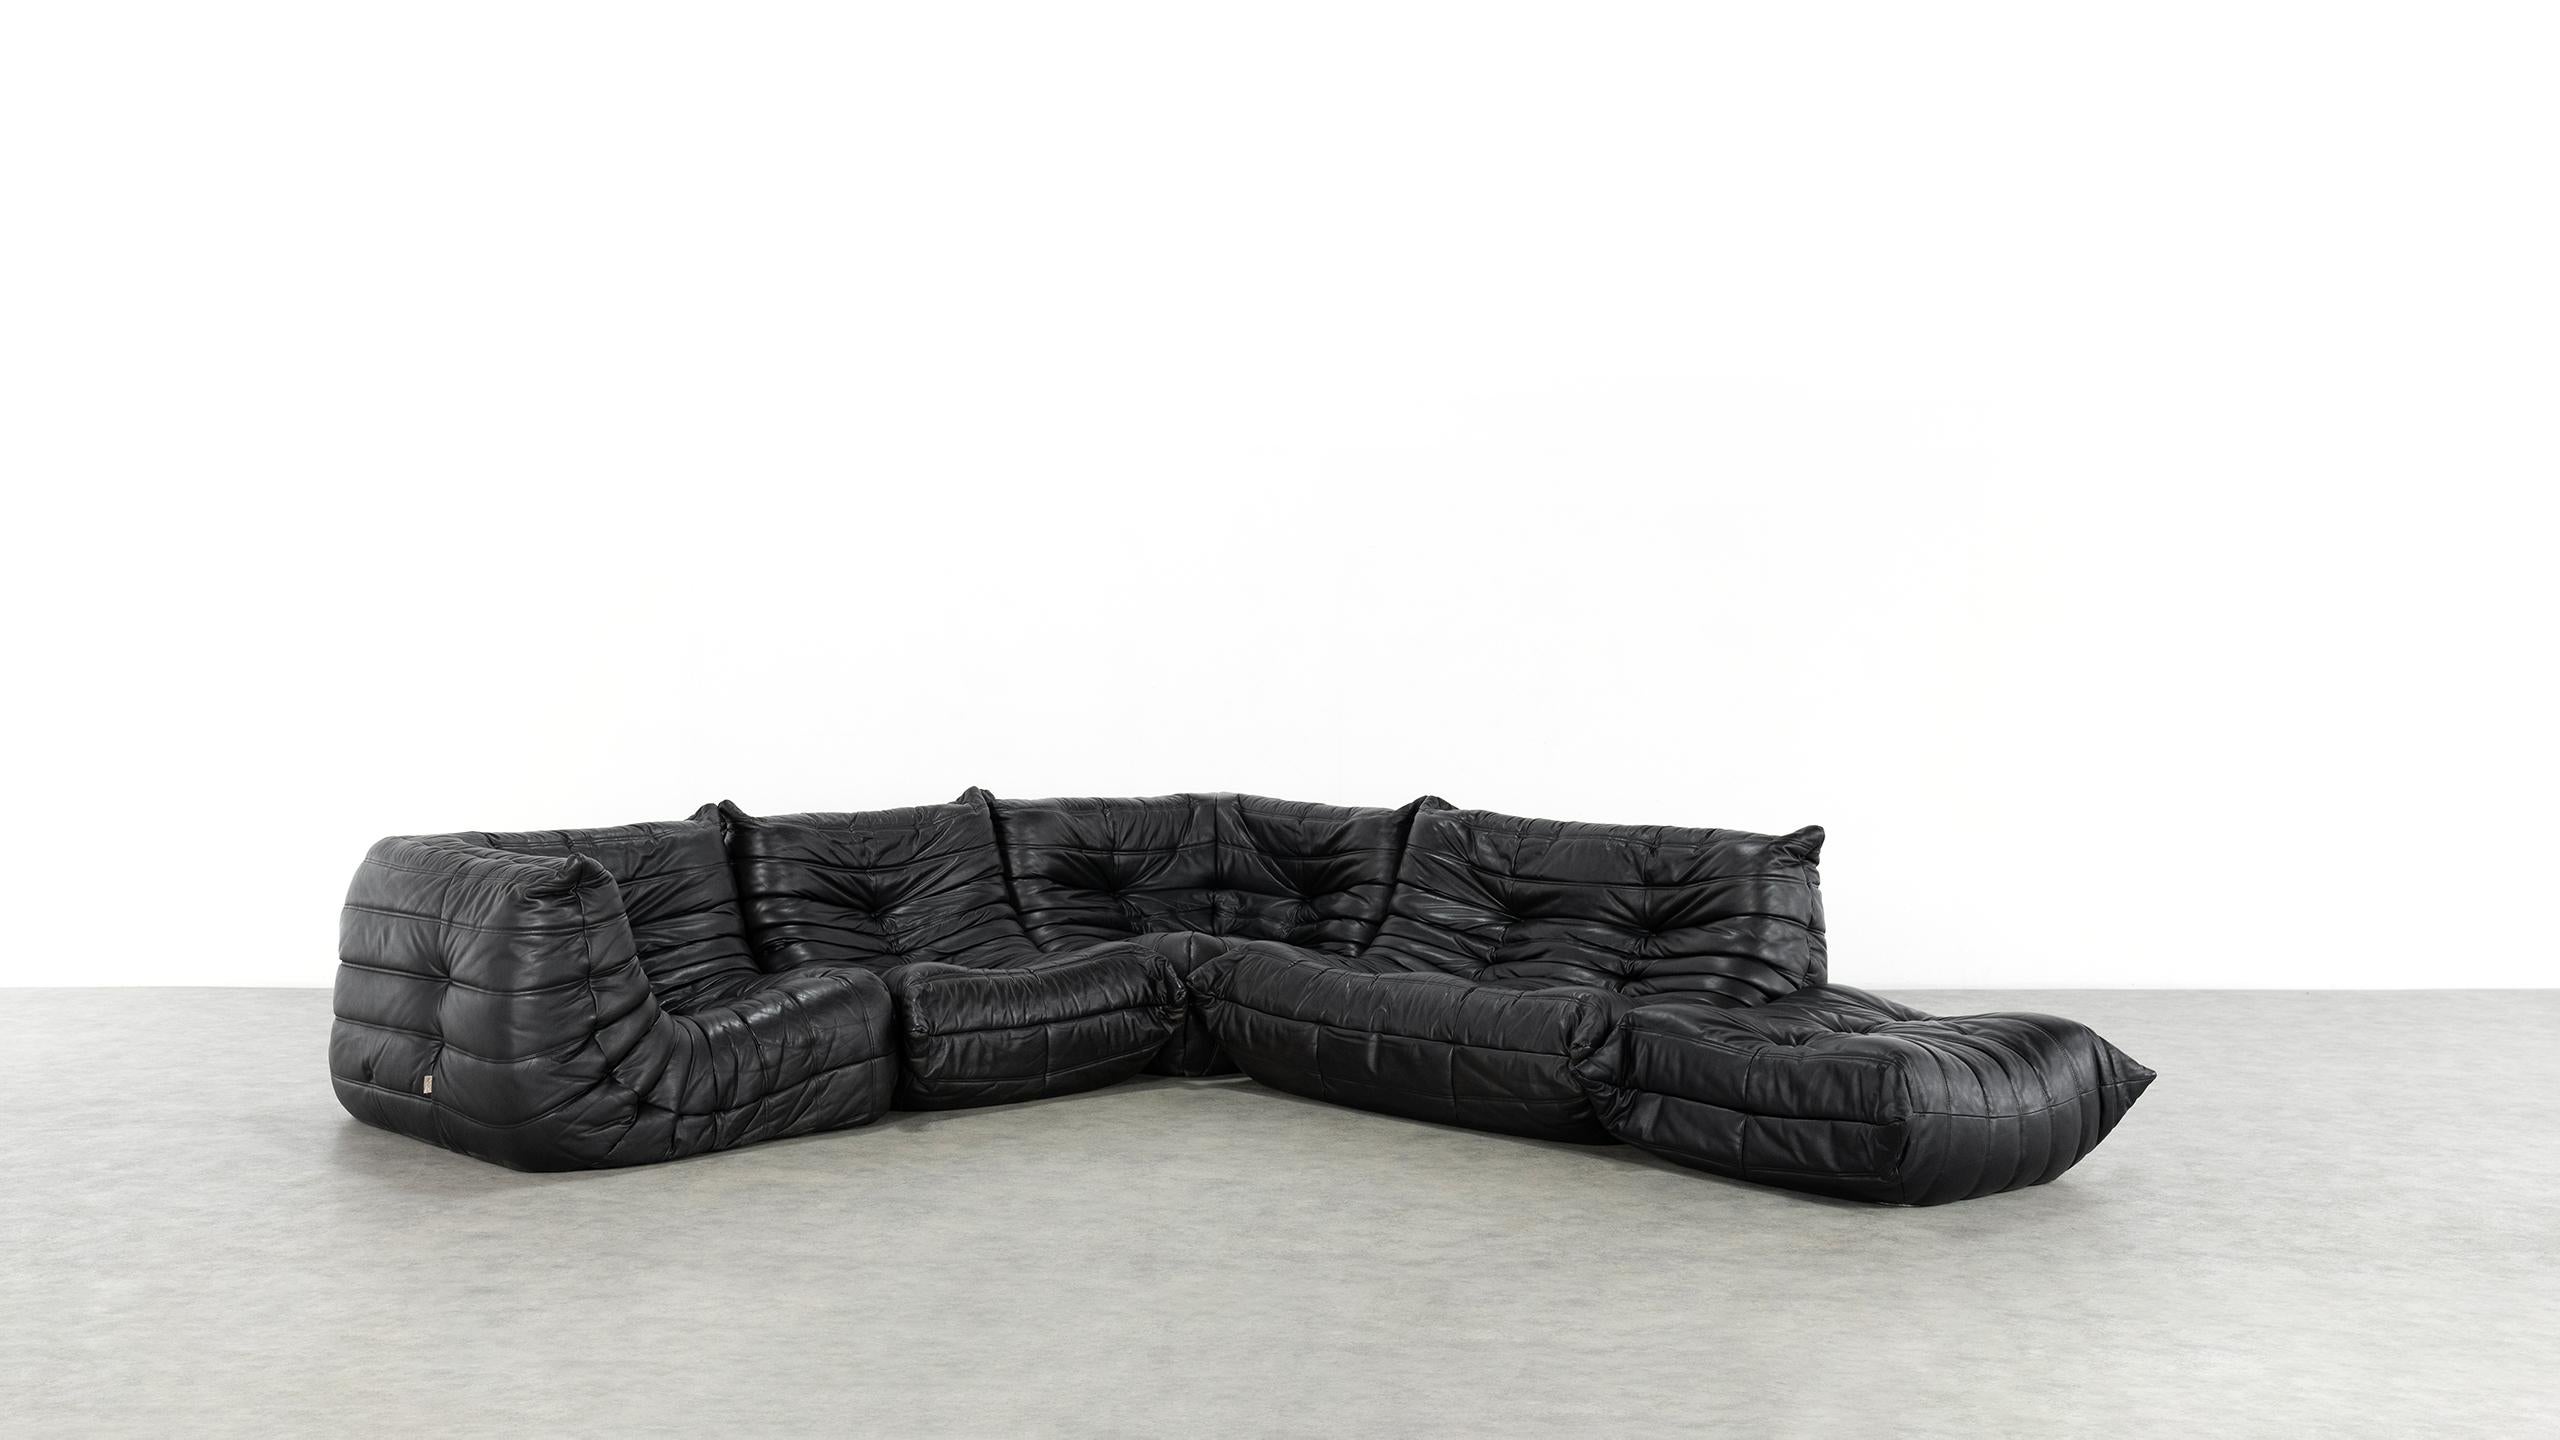 This Togo living landscape sofa was designed by Michel Ducaroy in 1974.

Made by Ligne Roset about 1990 in France, stunning beautiful original condition in soft black leather.
Completely original, not an 